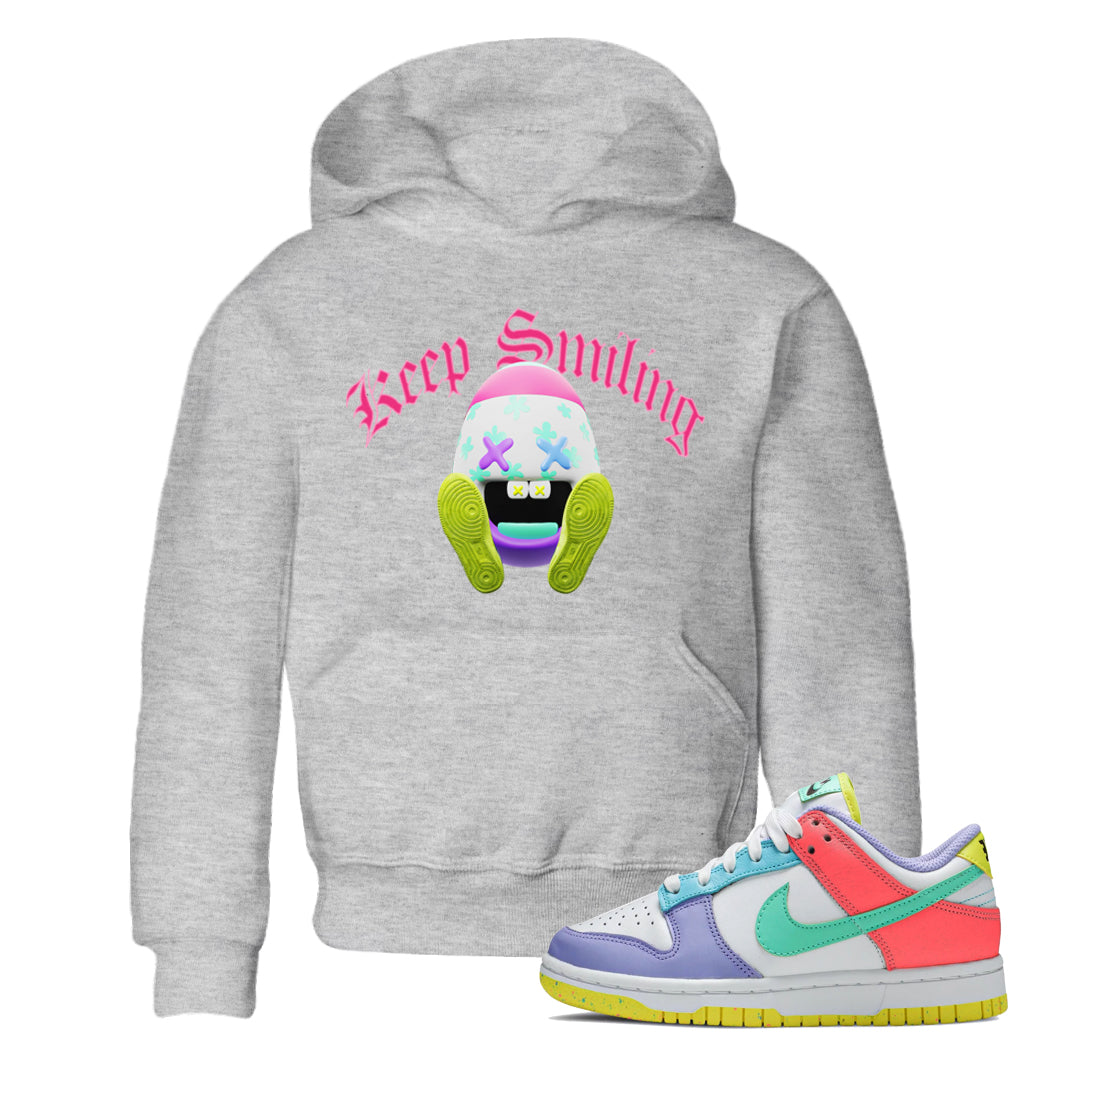 Dunk Easter Candy Sneaker Tees Drip Gear Zone Keep Smiling Sneaker Tees Nike Easter Shirt Kids Shirts Heather Grey 1